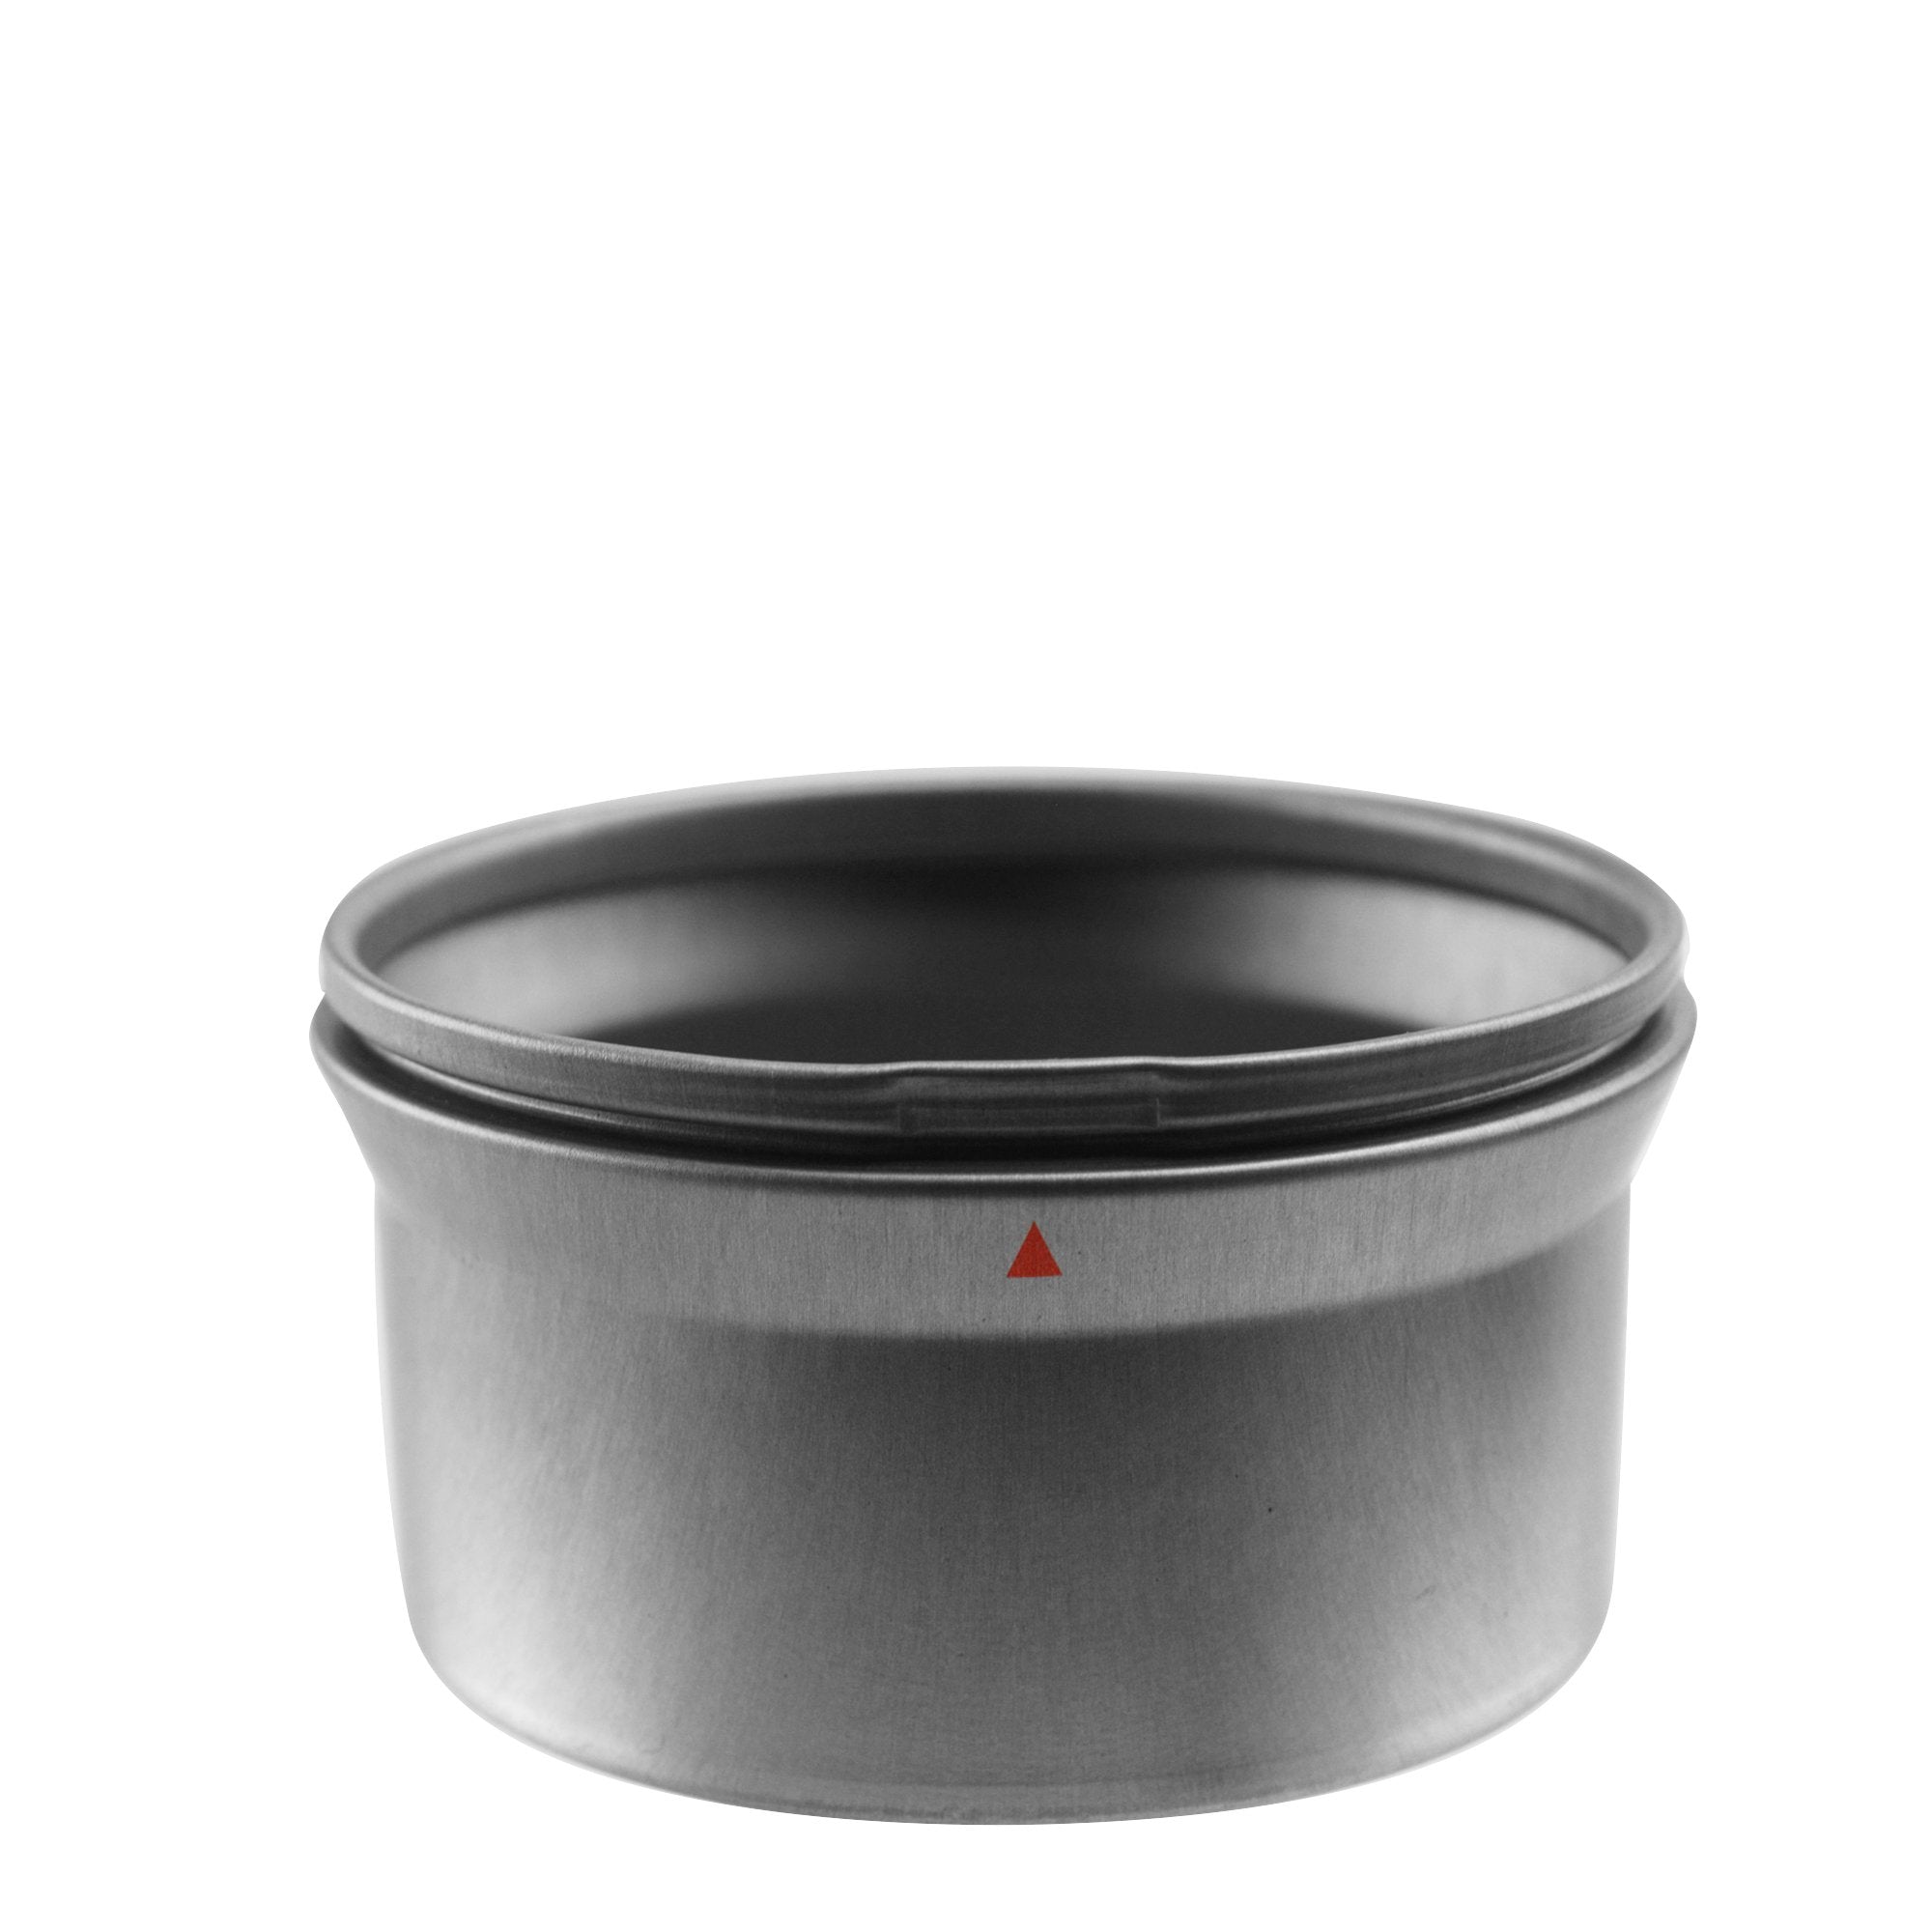 Sample Child Resistant | Safely Lock Sentinel Tin with Cap | Small and Medium - Brushed Metal - 6